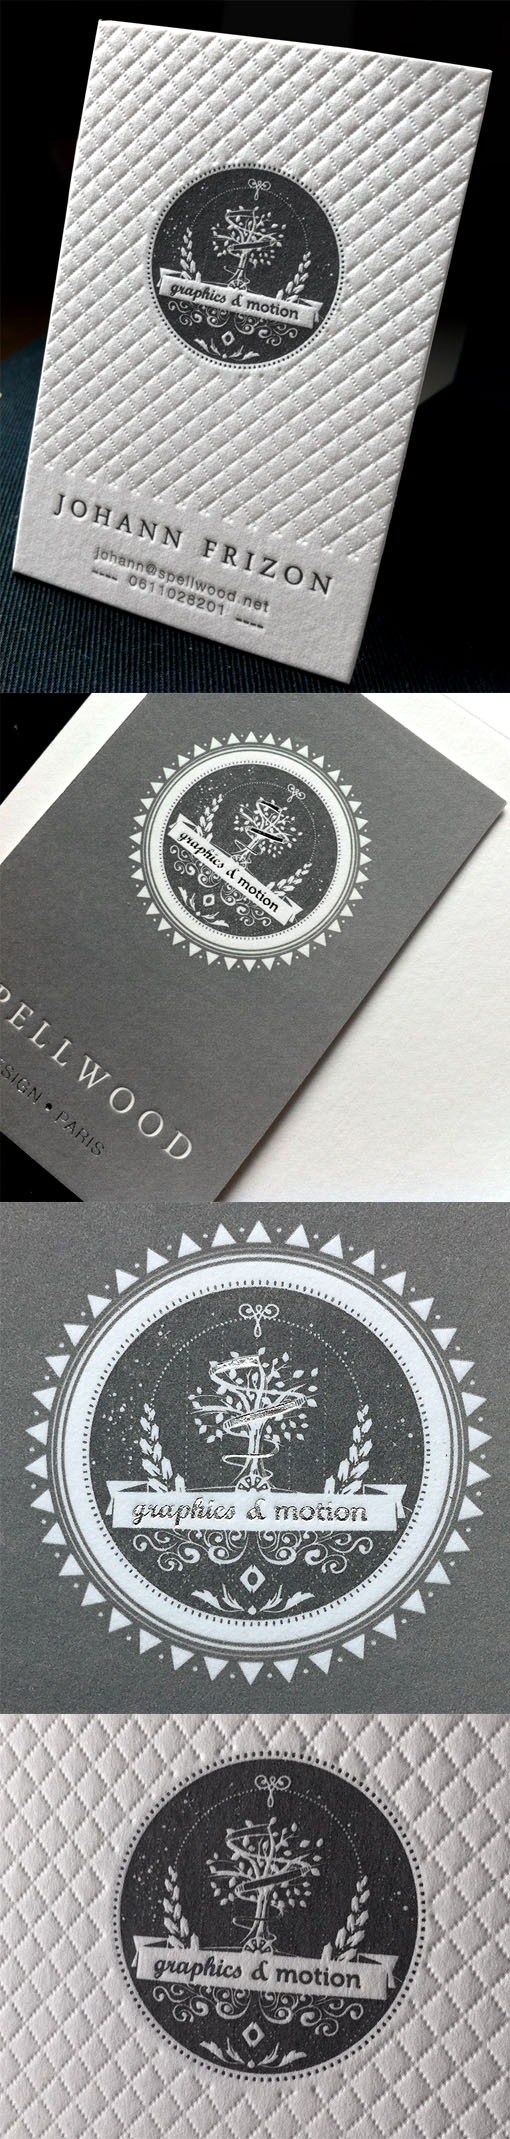 Stylish Textured Black And White Letterpress Business Card Design